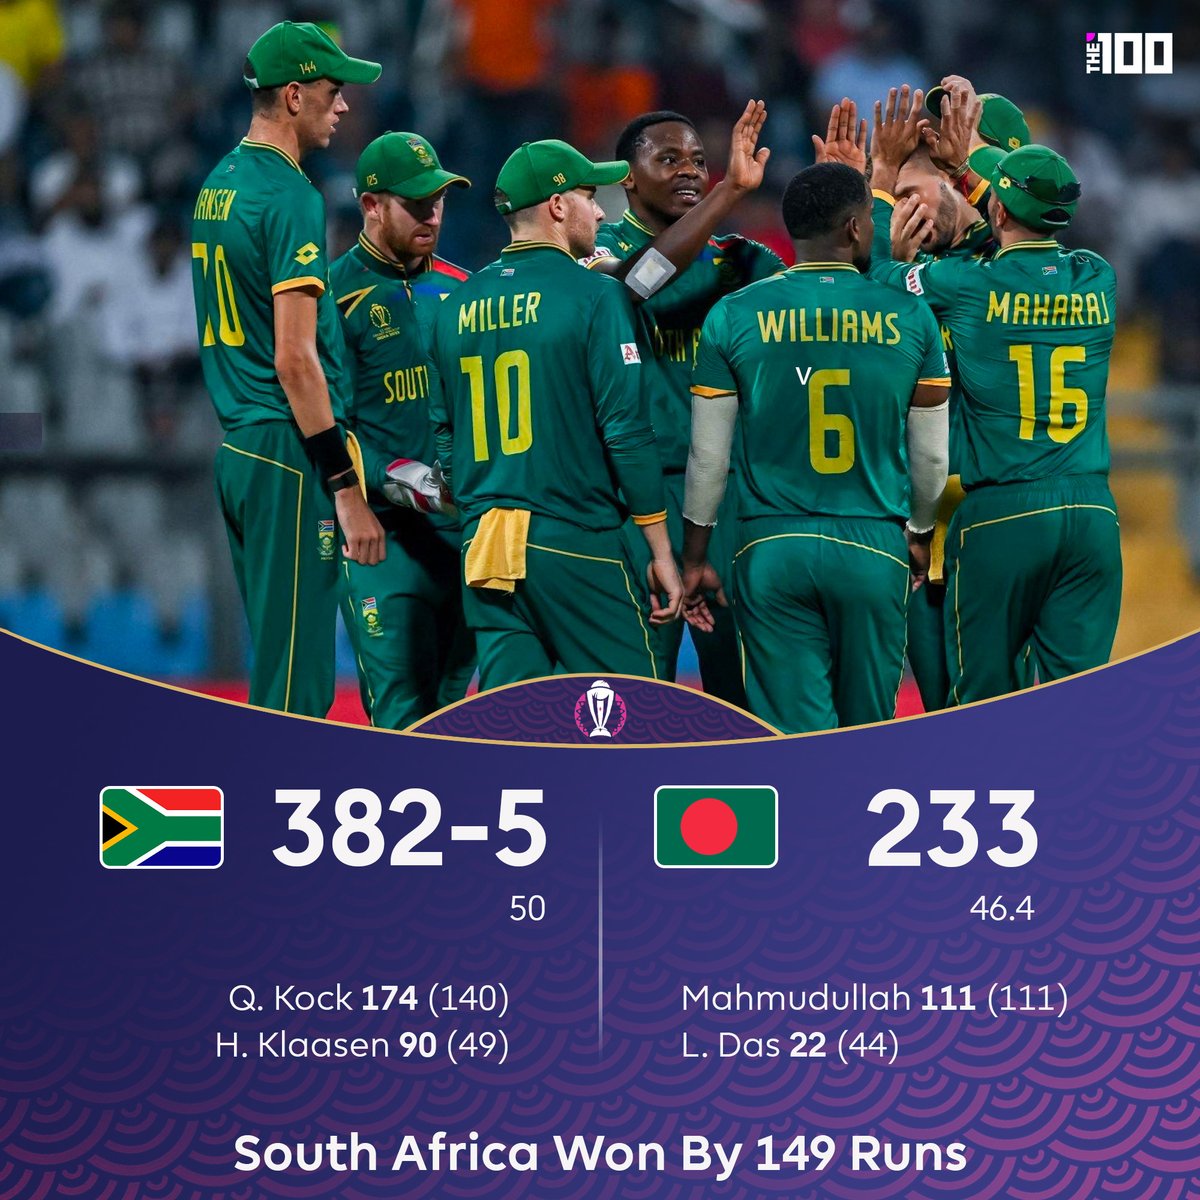 South Africa have defeated Bangladesh by 149 runs🔥 

Dominance of Proteas in this World Cup is unreal🇿🇦

#SAvBAN #CWC23 #HenryKlaasen